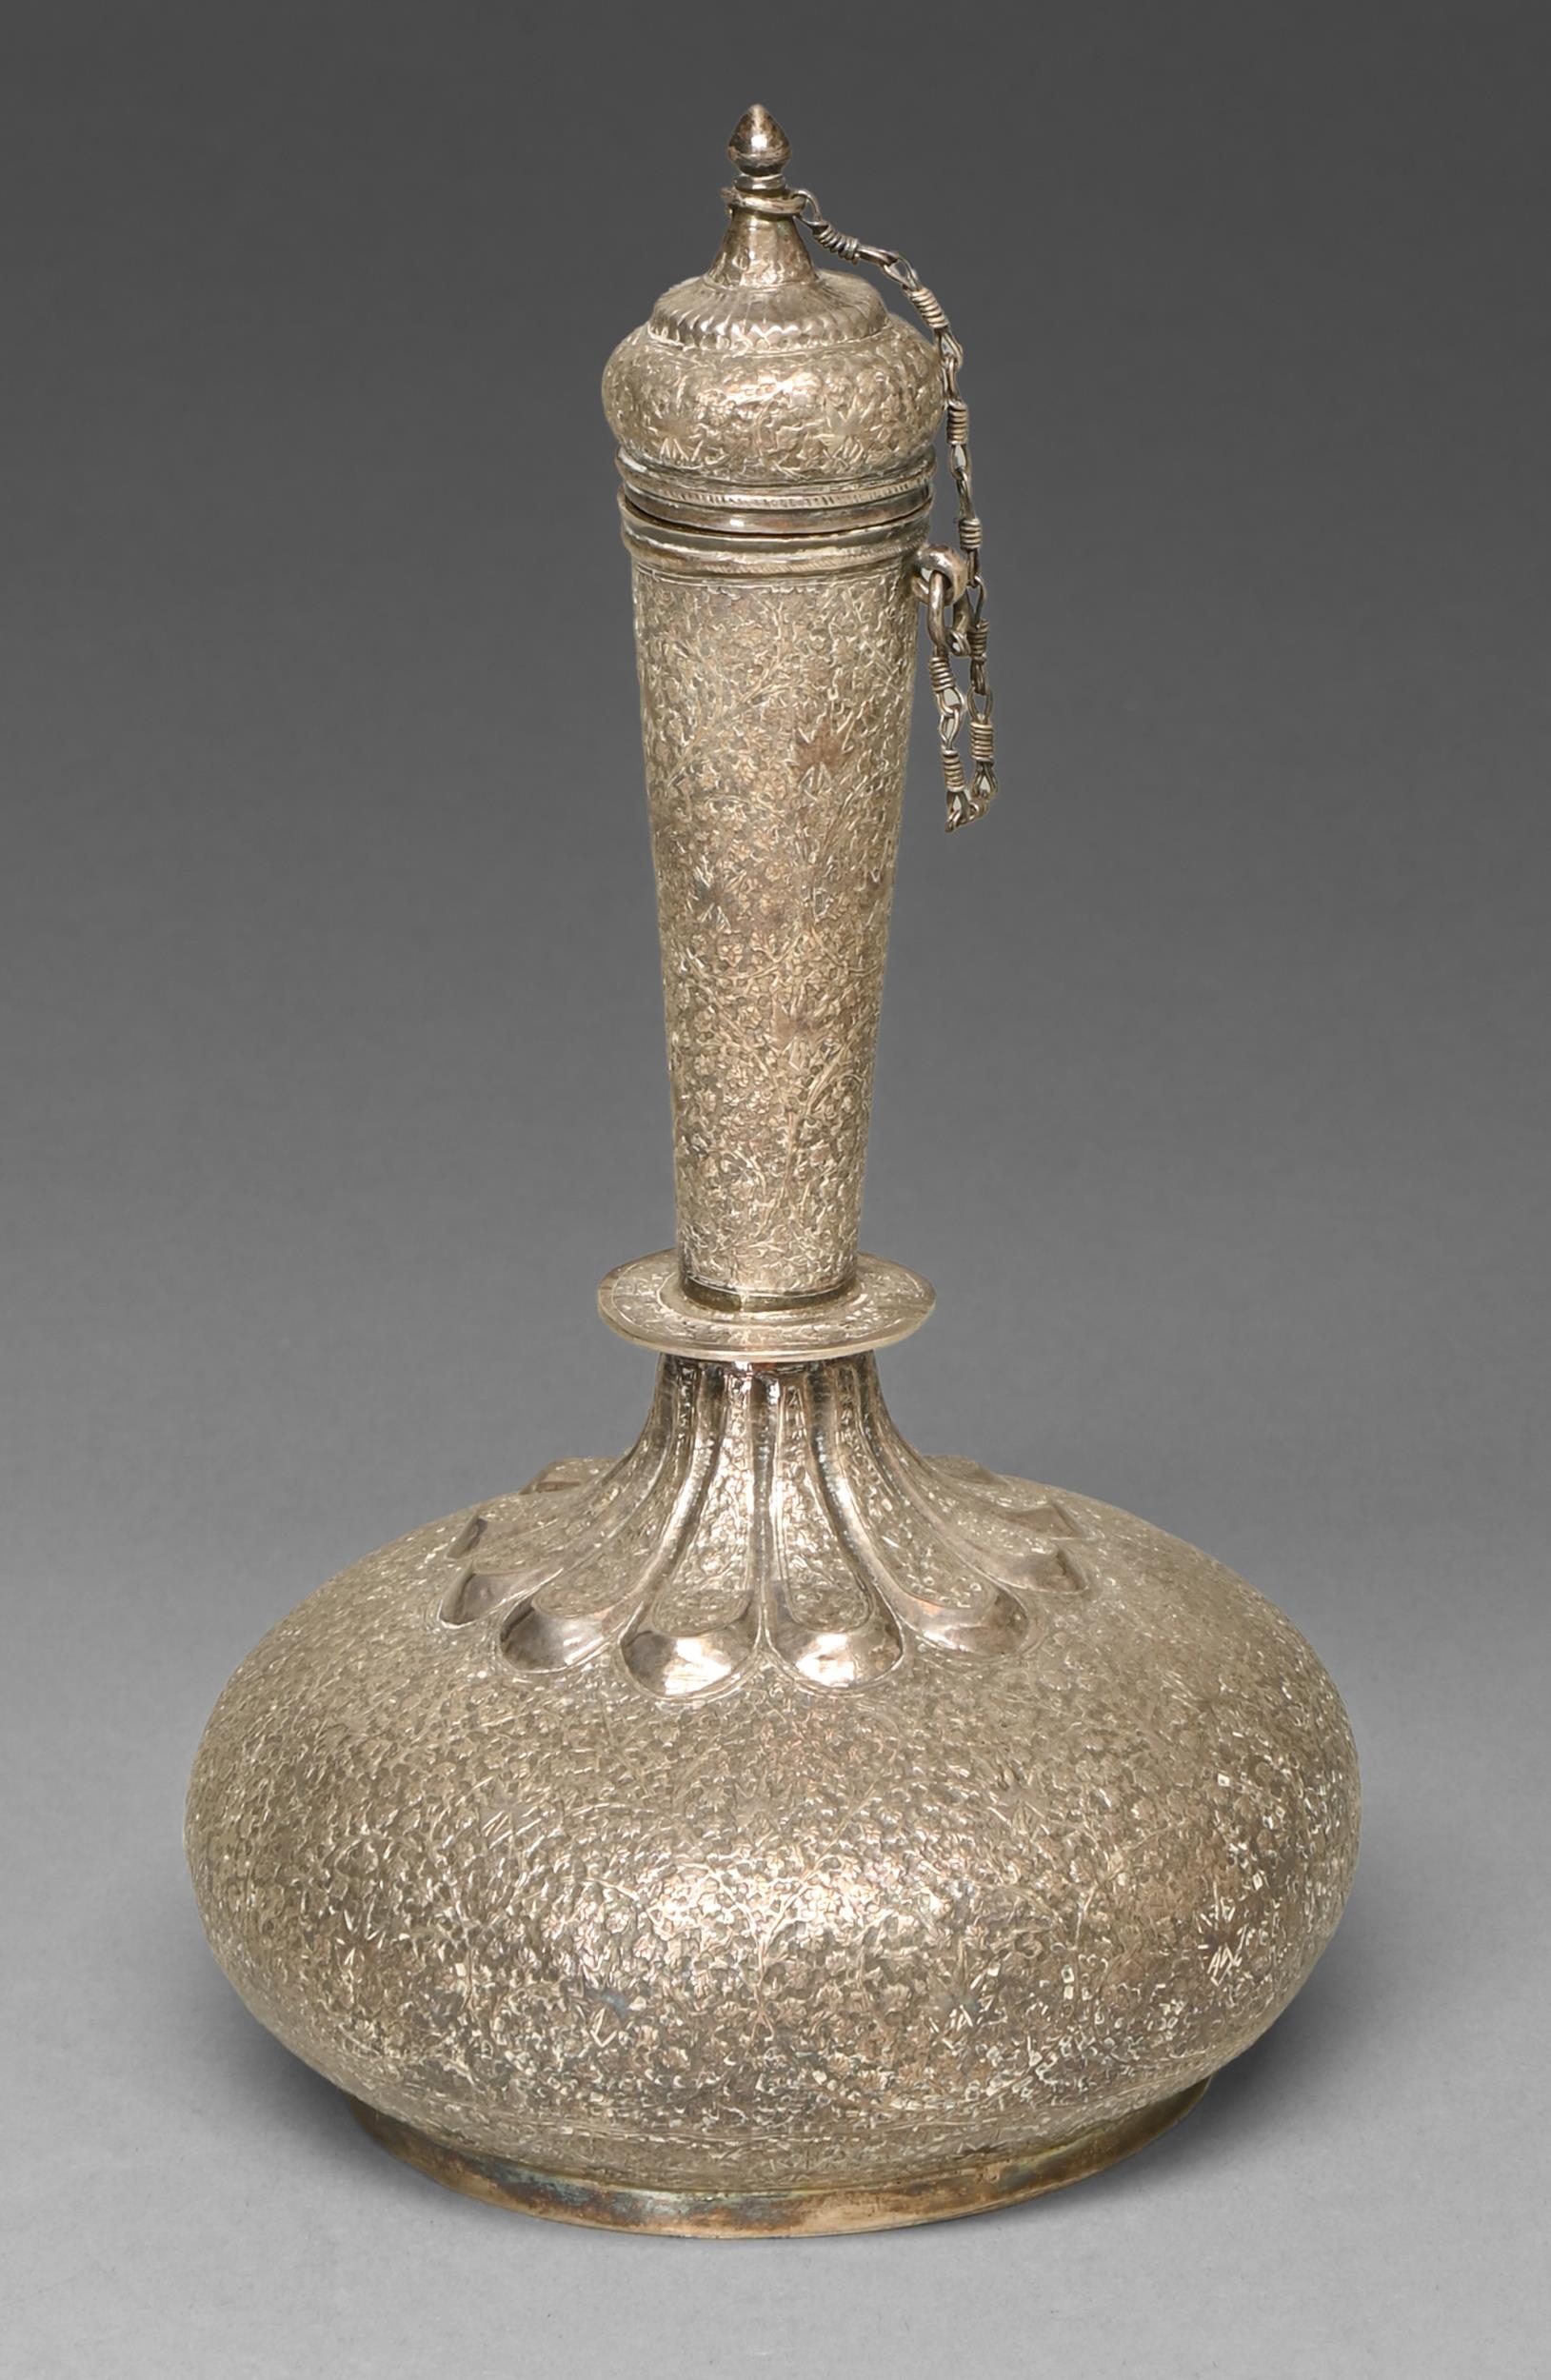 A silver flask and stopper, North India or Kashmir, 19th c, intricately chased with leaves and